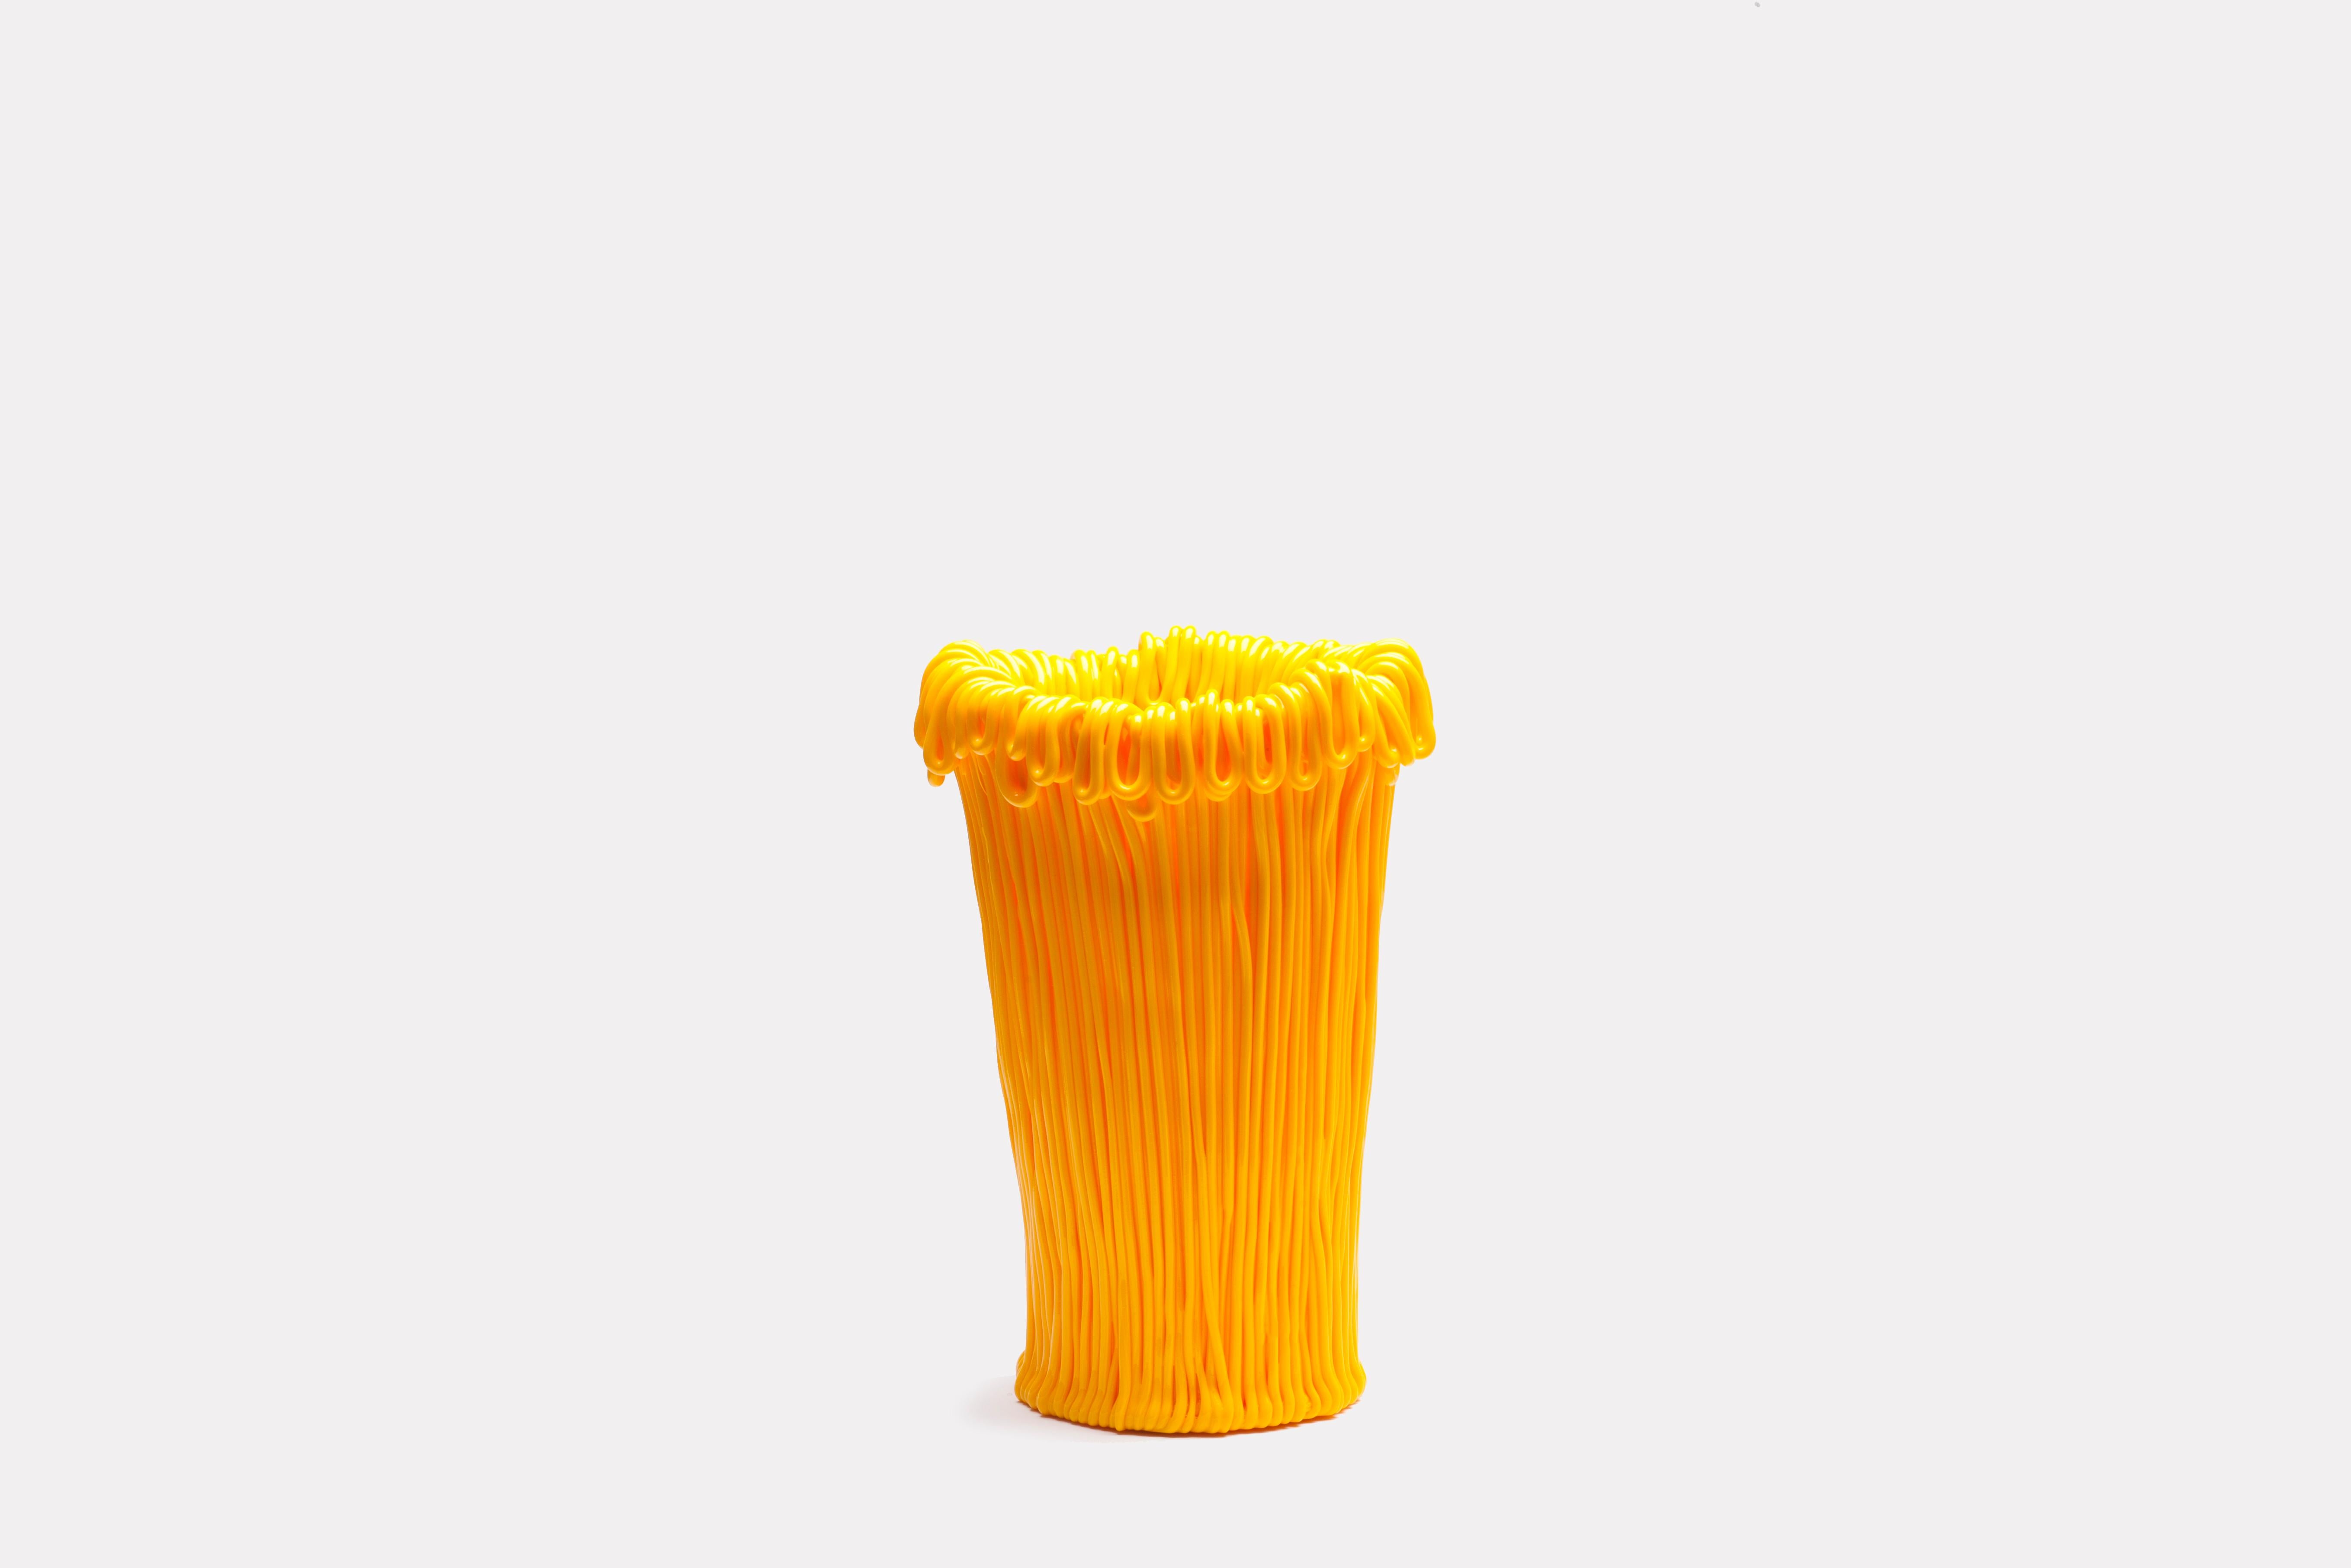 With its blazing colors and expressive shape, the Frillo vase strikes the perfect balance between function and frivolity. Each vase is handcrafted in piped silicone, providing a unique and colorful highlight to any modern interior.